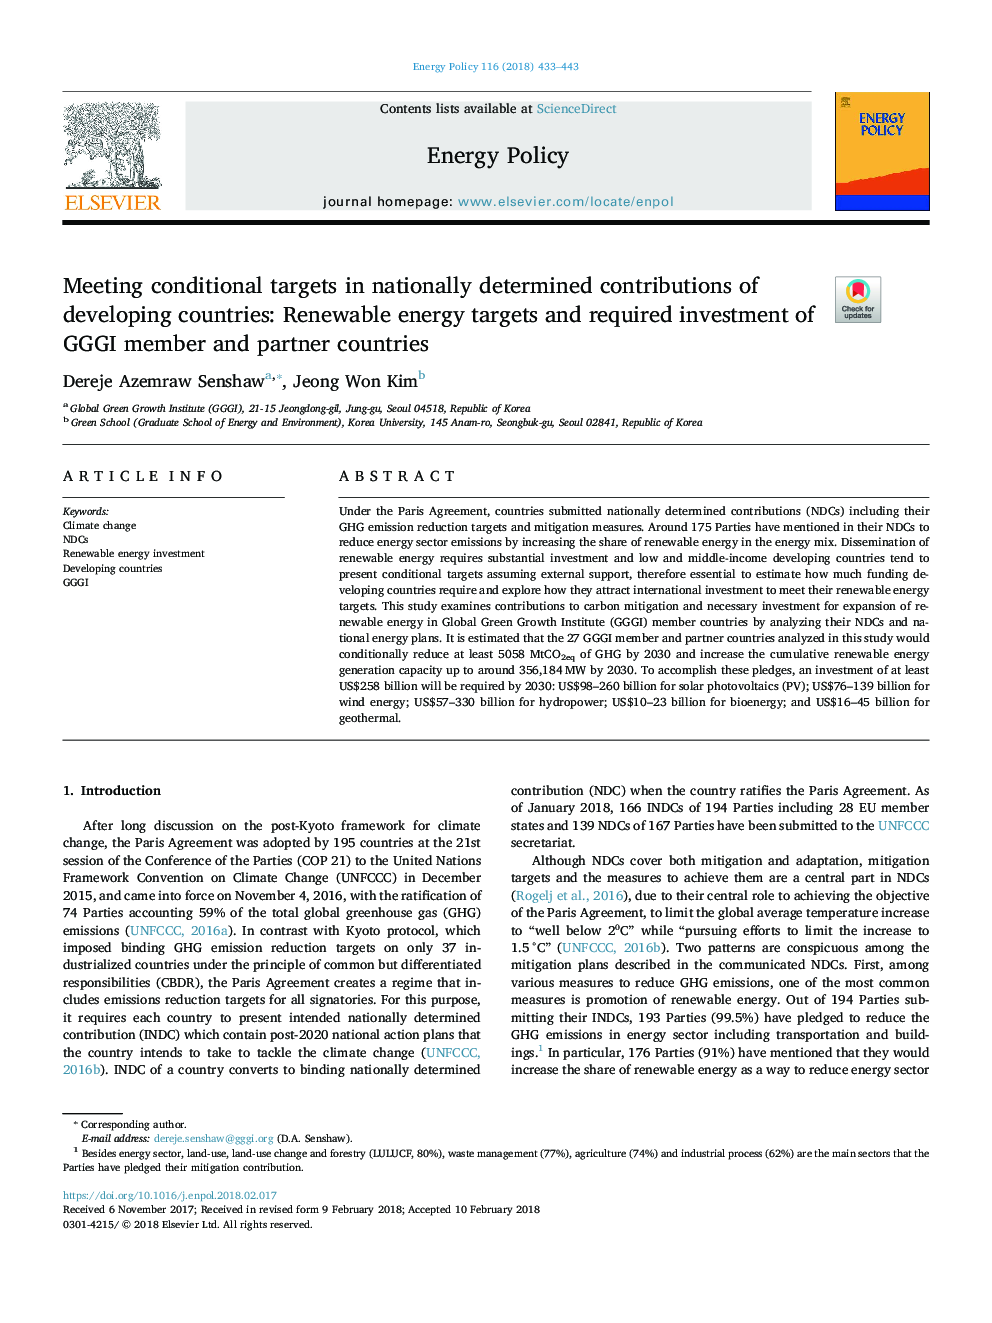 Meeting conditional targets in nationally determined contributions of developing countries: Renewable energy targets and required investment of GGGI member and partner countries